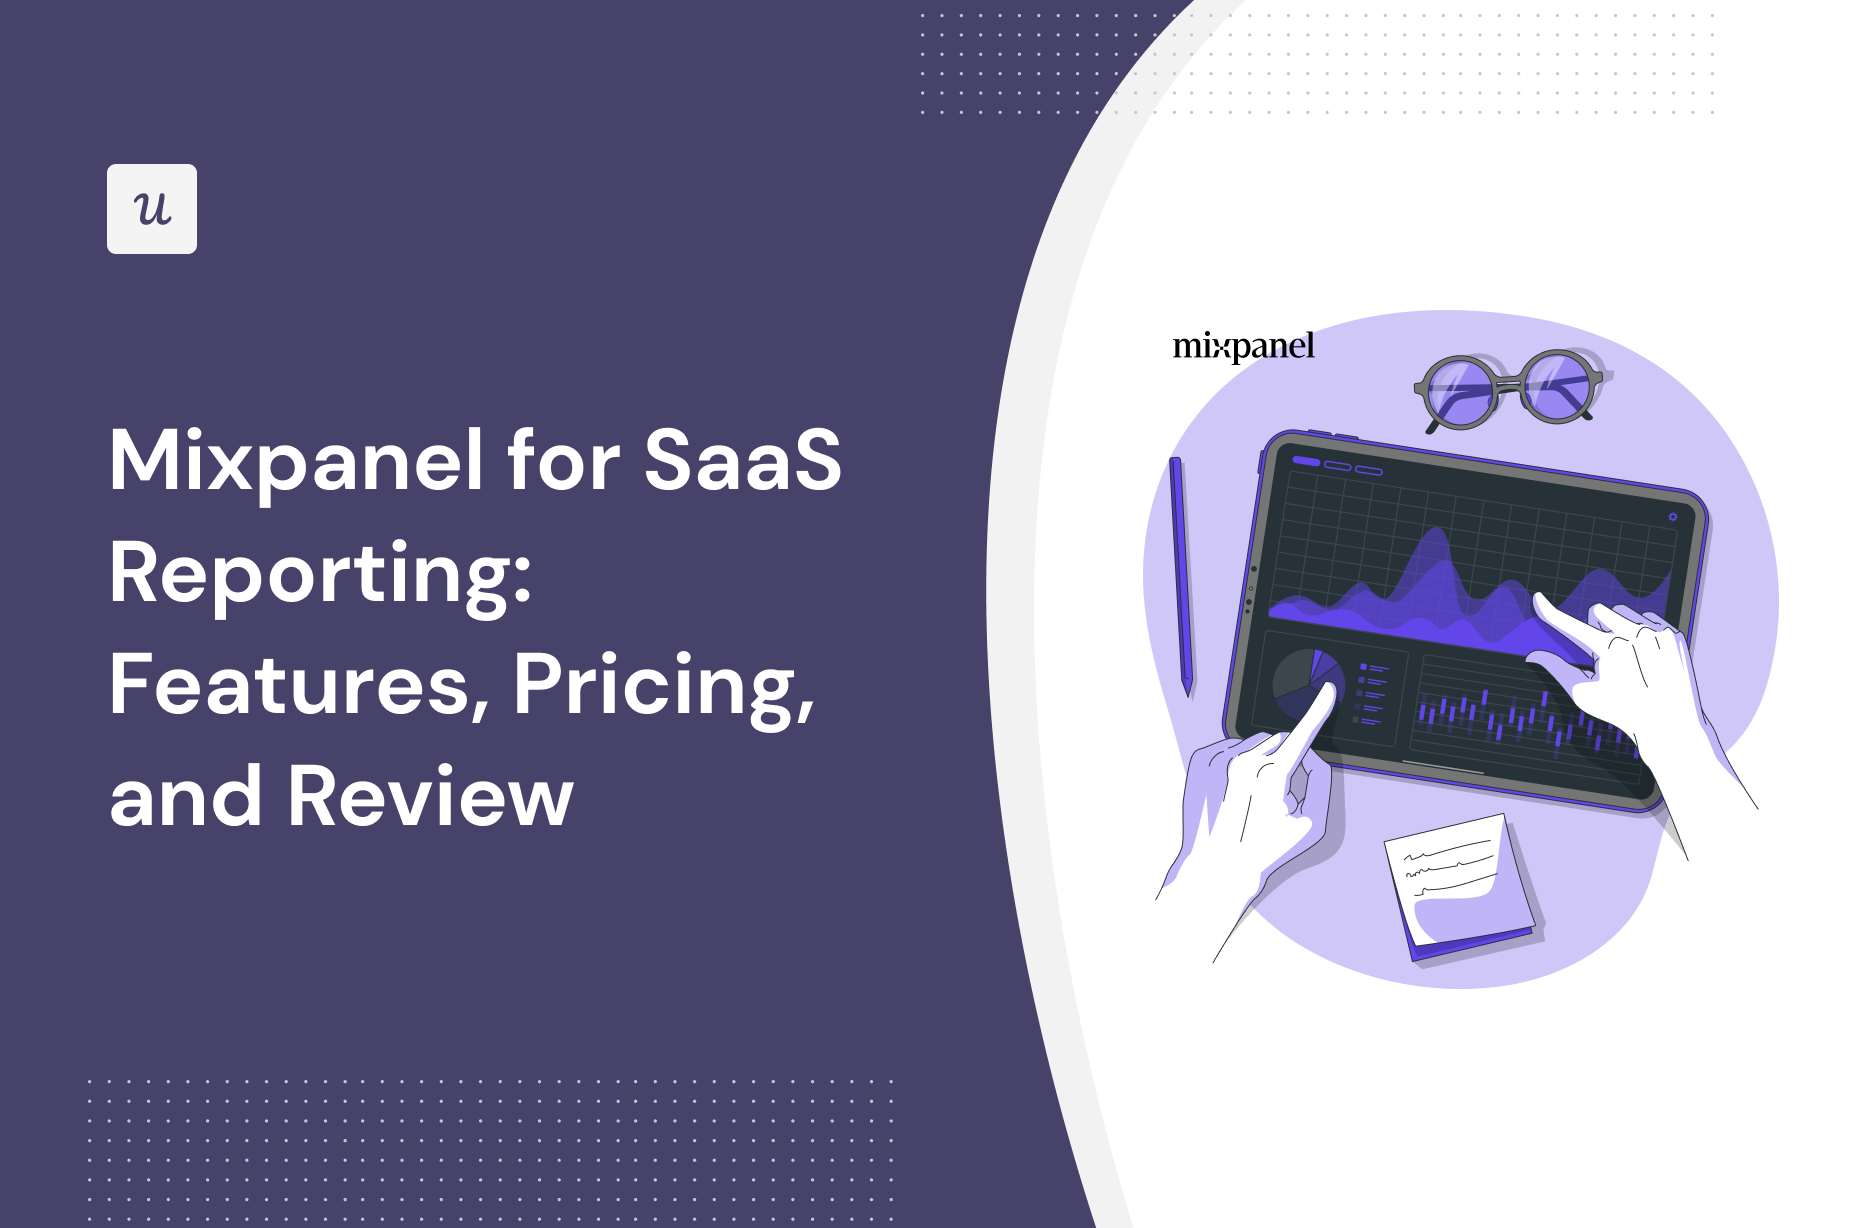 Mixpanel for SaaS Reporting: Features, Pricing, and Review